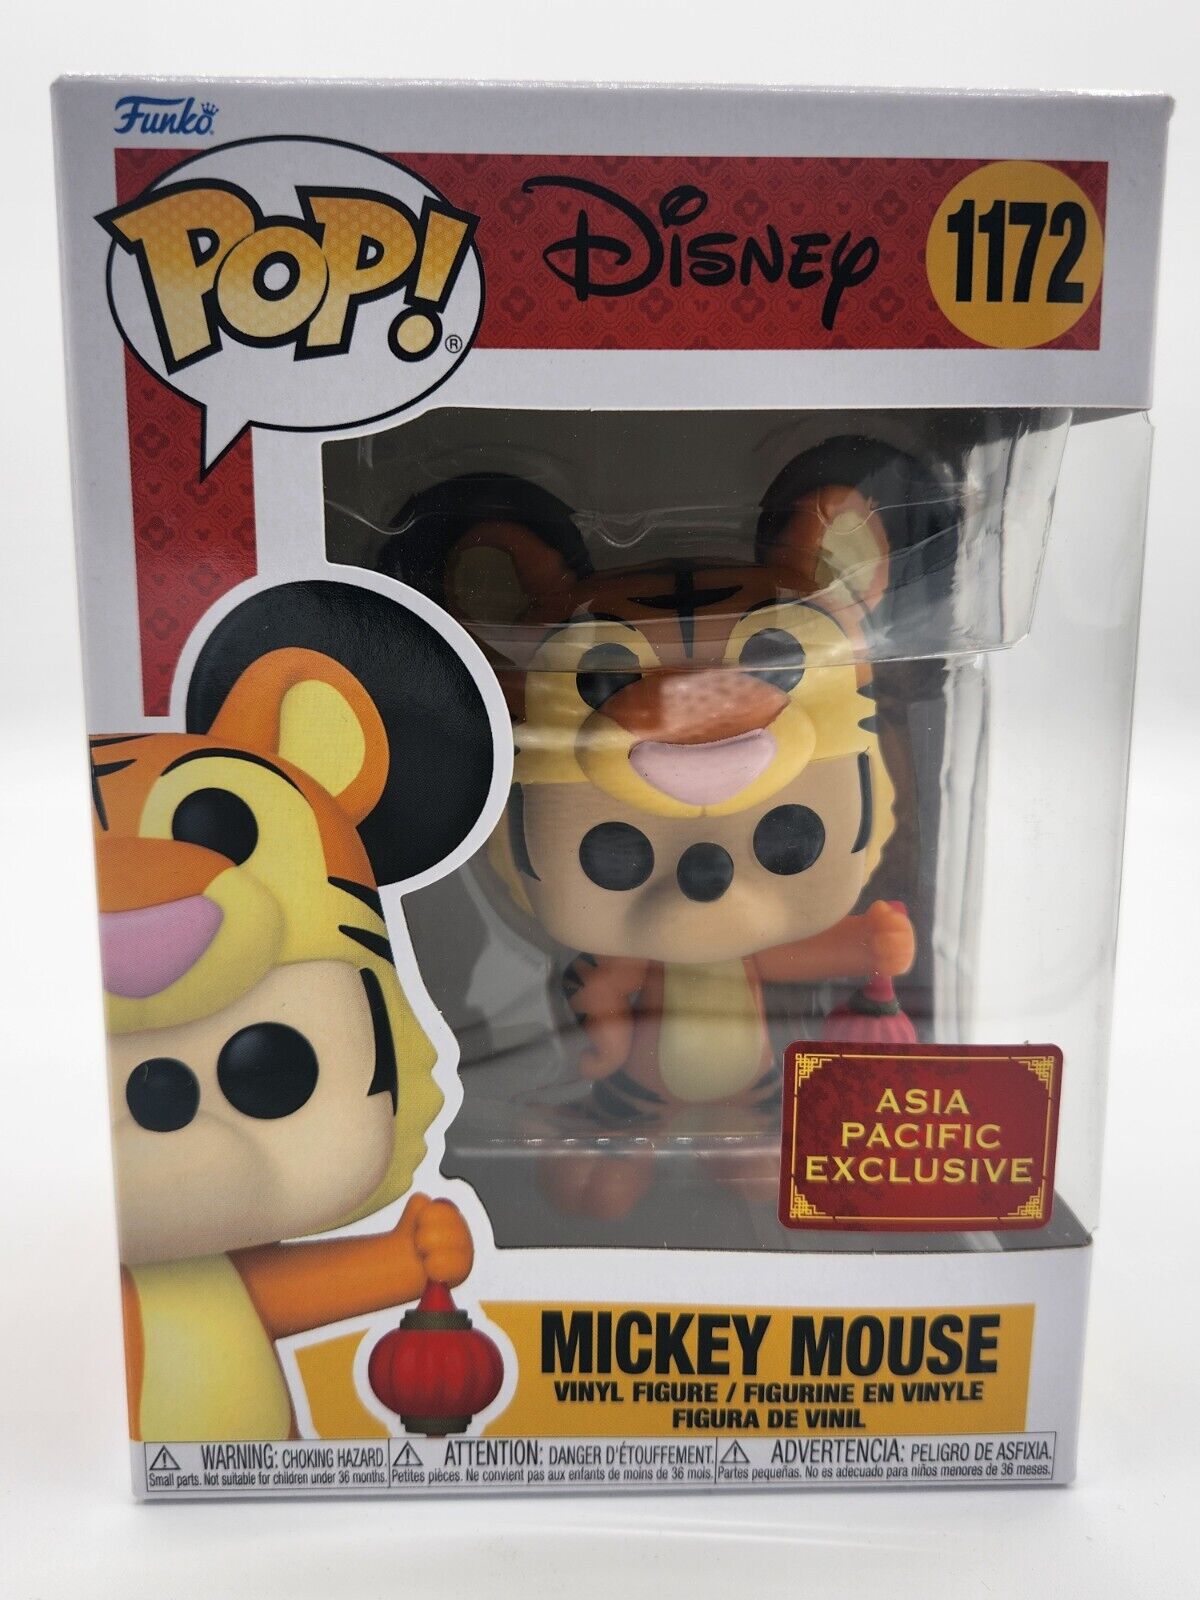 NEW Disney Lunar New Year Pop Vinyl CNY of the Tiger Costume Mickey Mouse [1172]